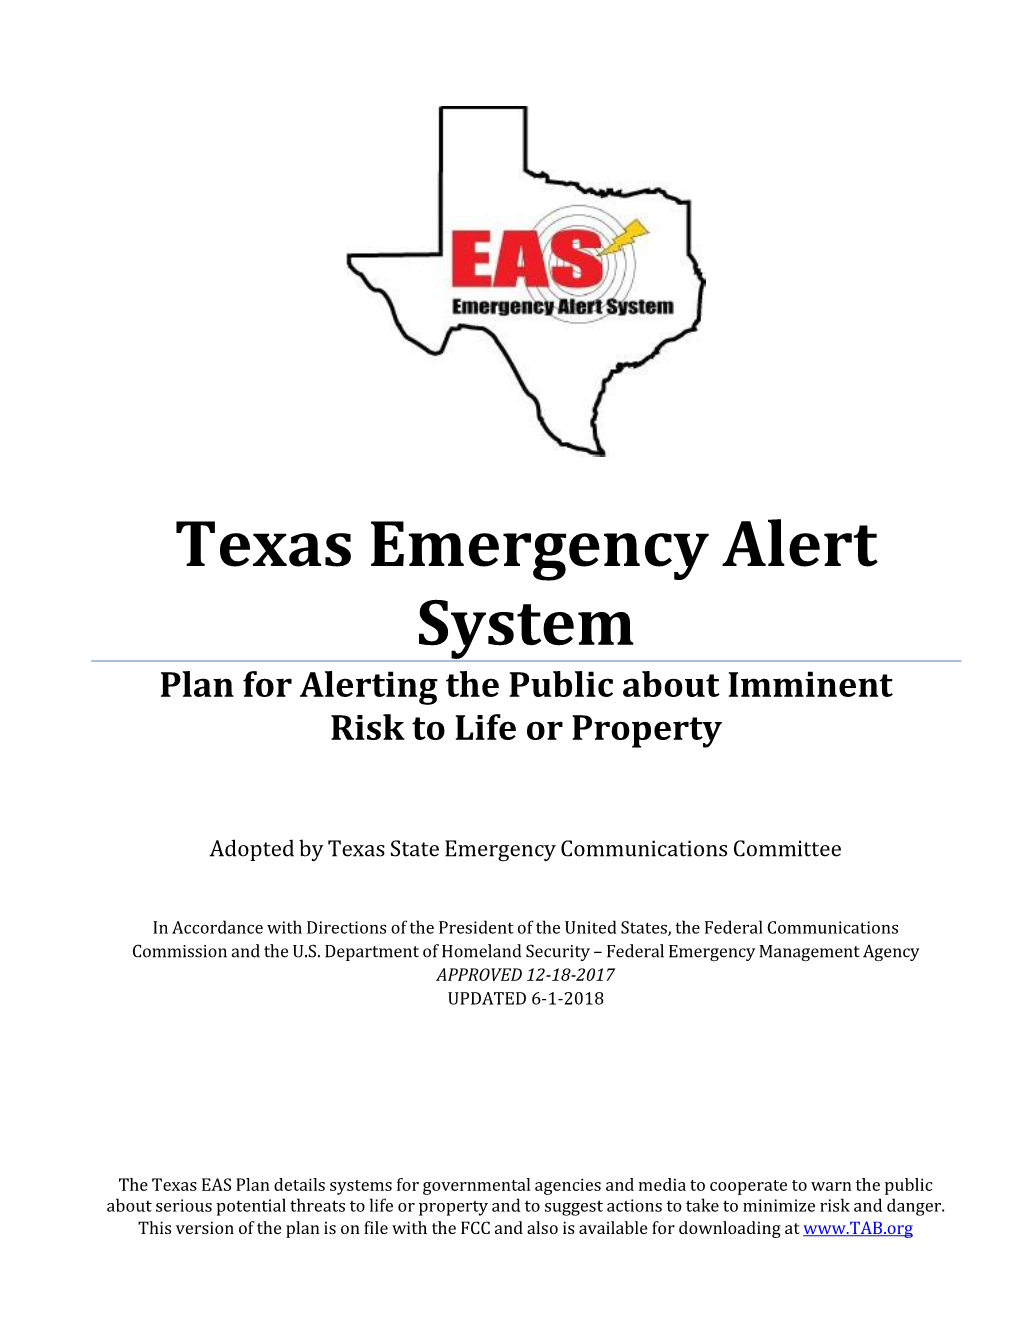 Texas State EAS Plan Actually Is a Multi-County Area Designated As ” Operational Area” Or “Local Area” for EAS Activation Purposes